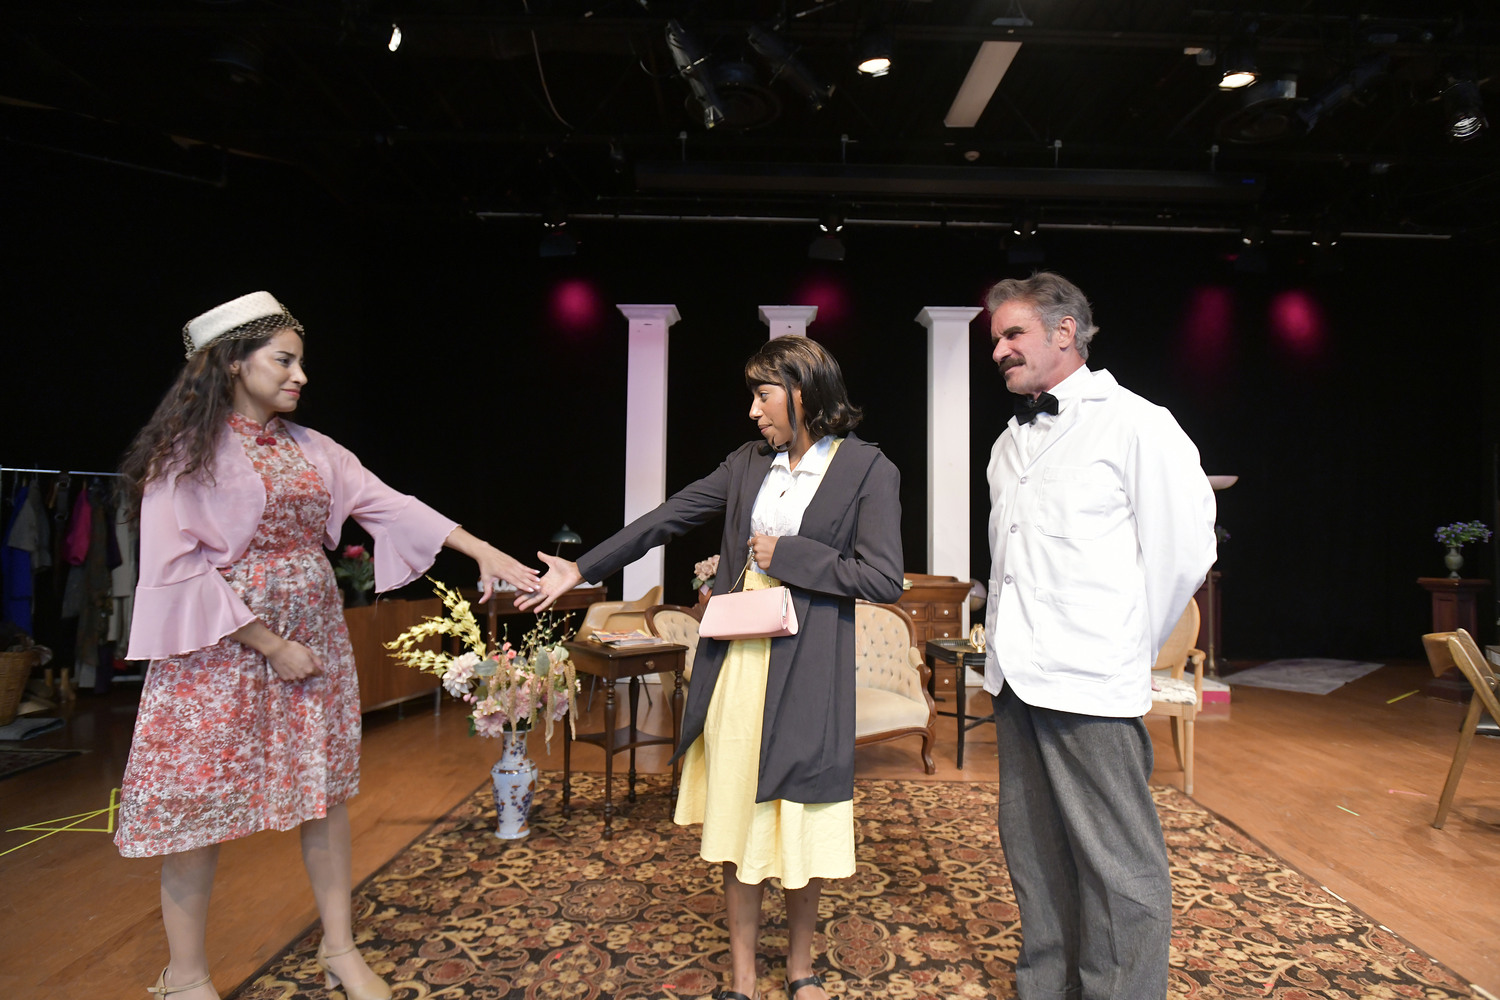 Esmeralda Cabrera, Cheyanne Metzger and Tom Gregory during a scene from 